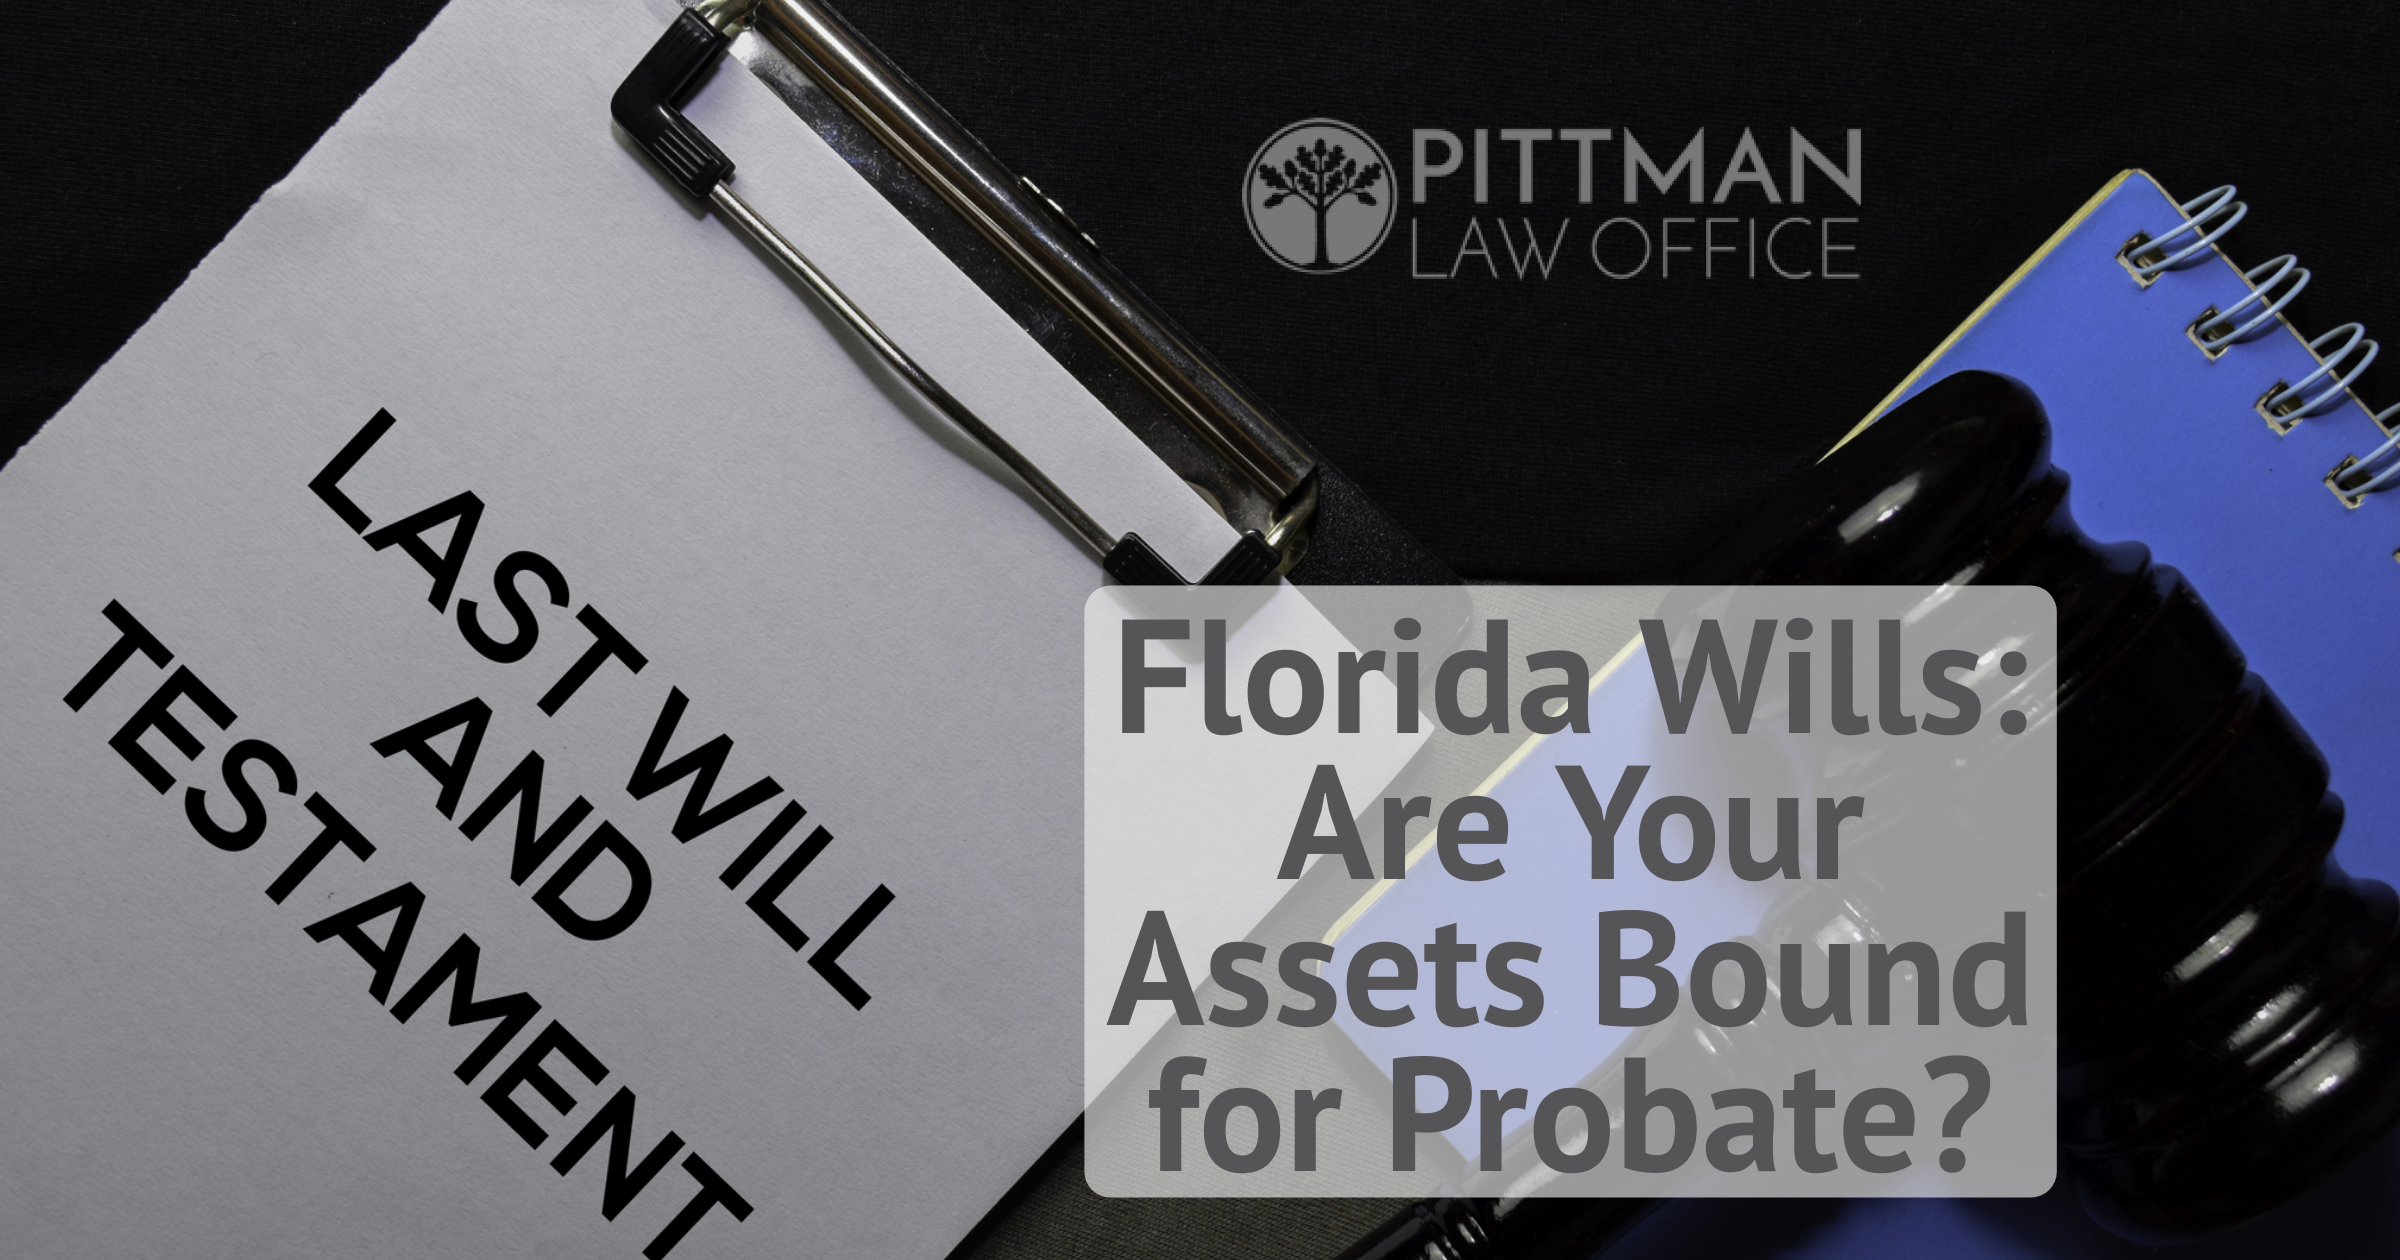 Florida Wills: Are Your Assets Bound for Probate?